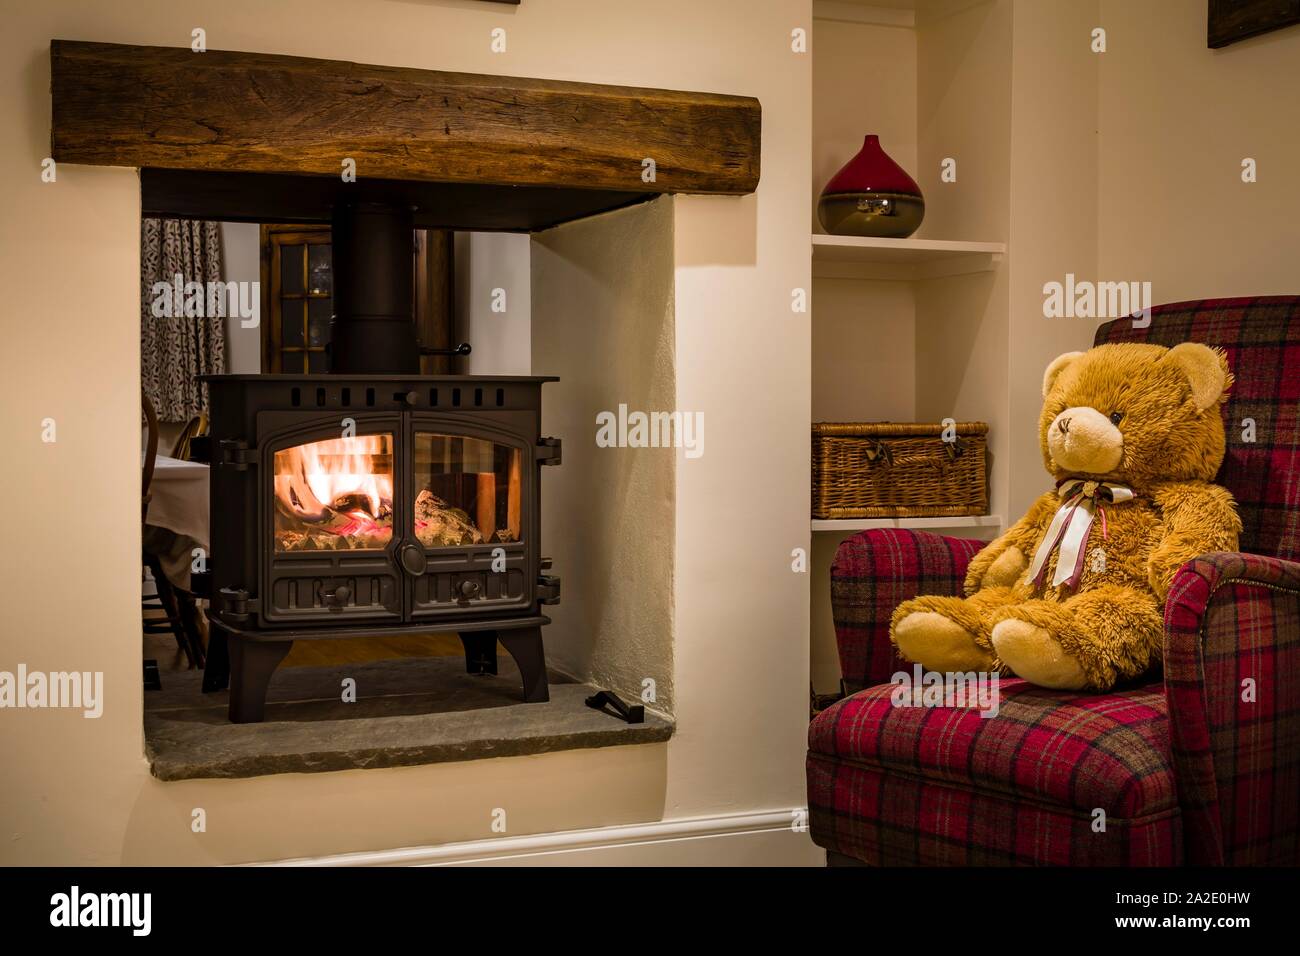 Cosy wood burning stove in a fireplace, UK Stock Photo